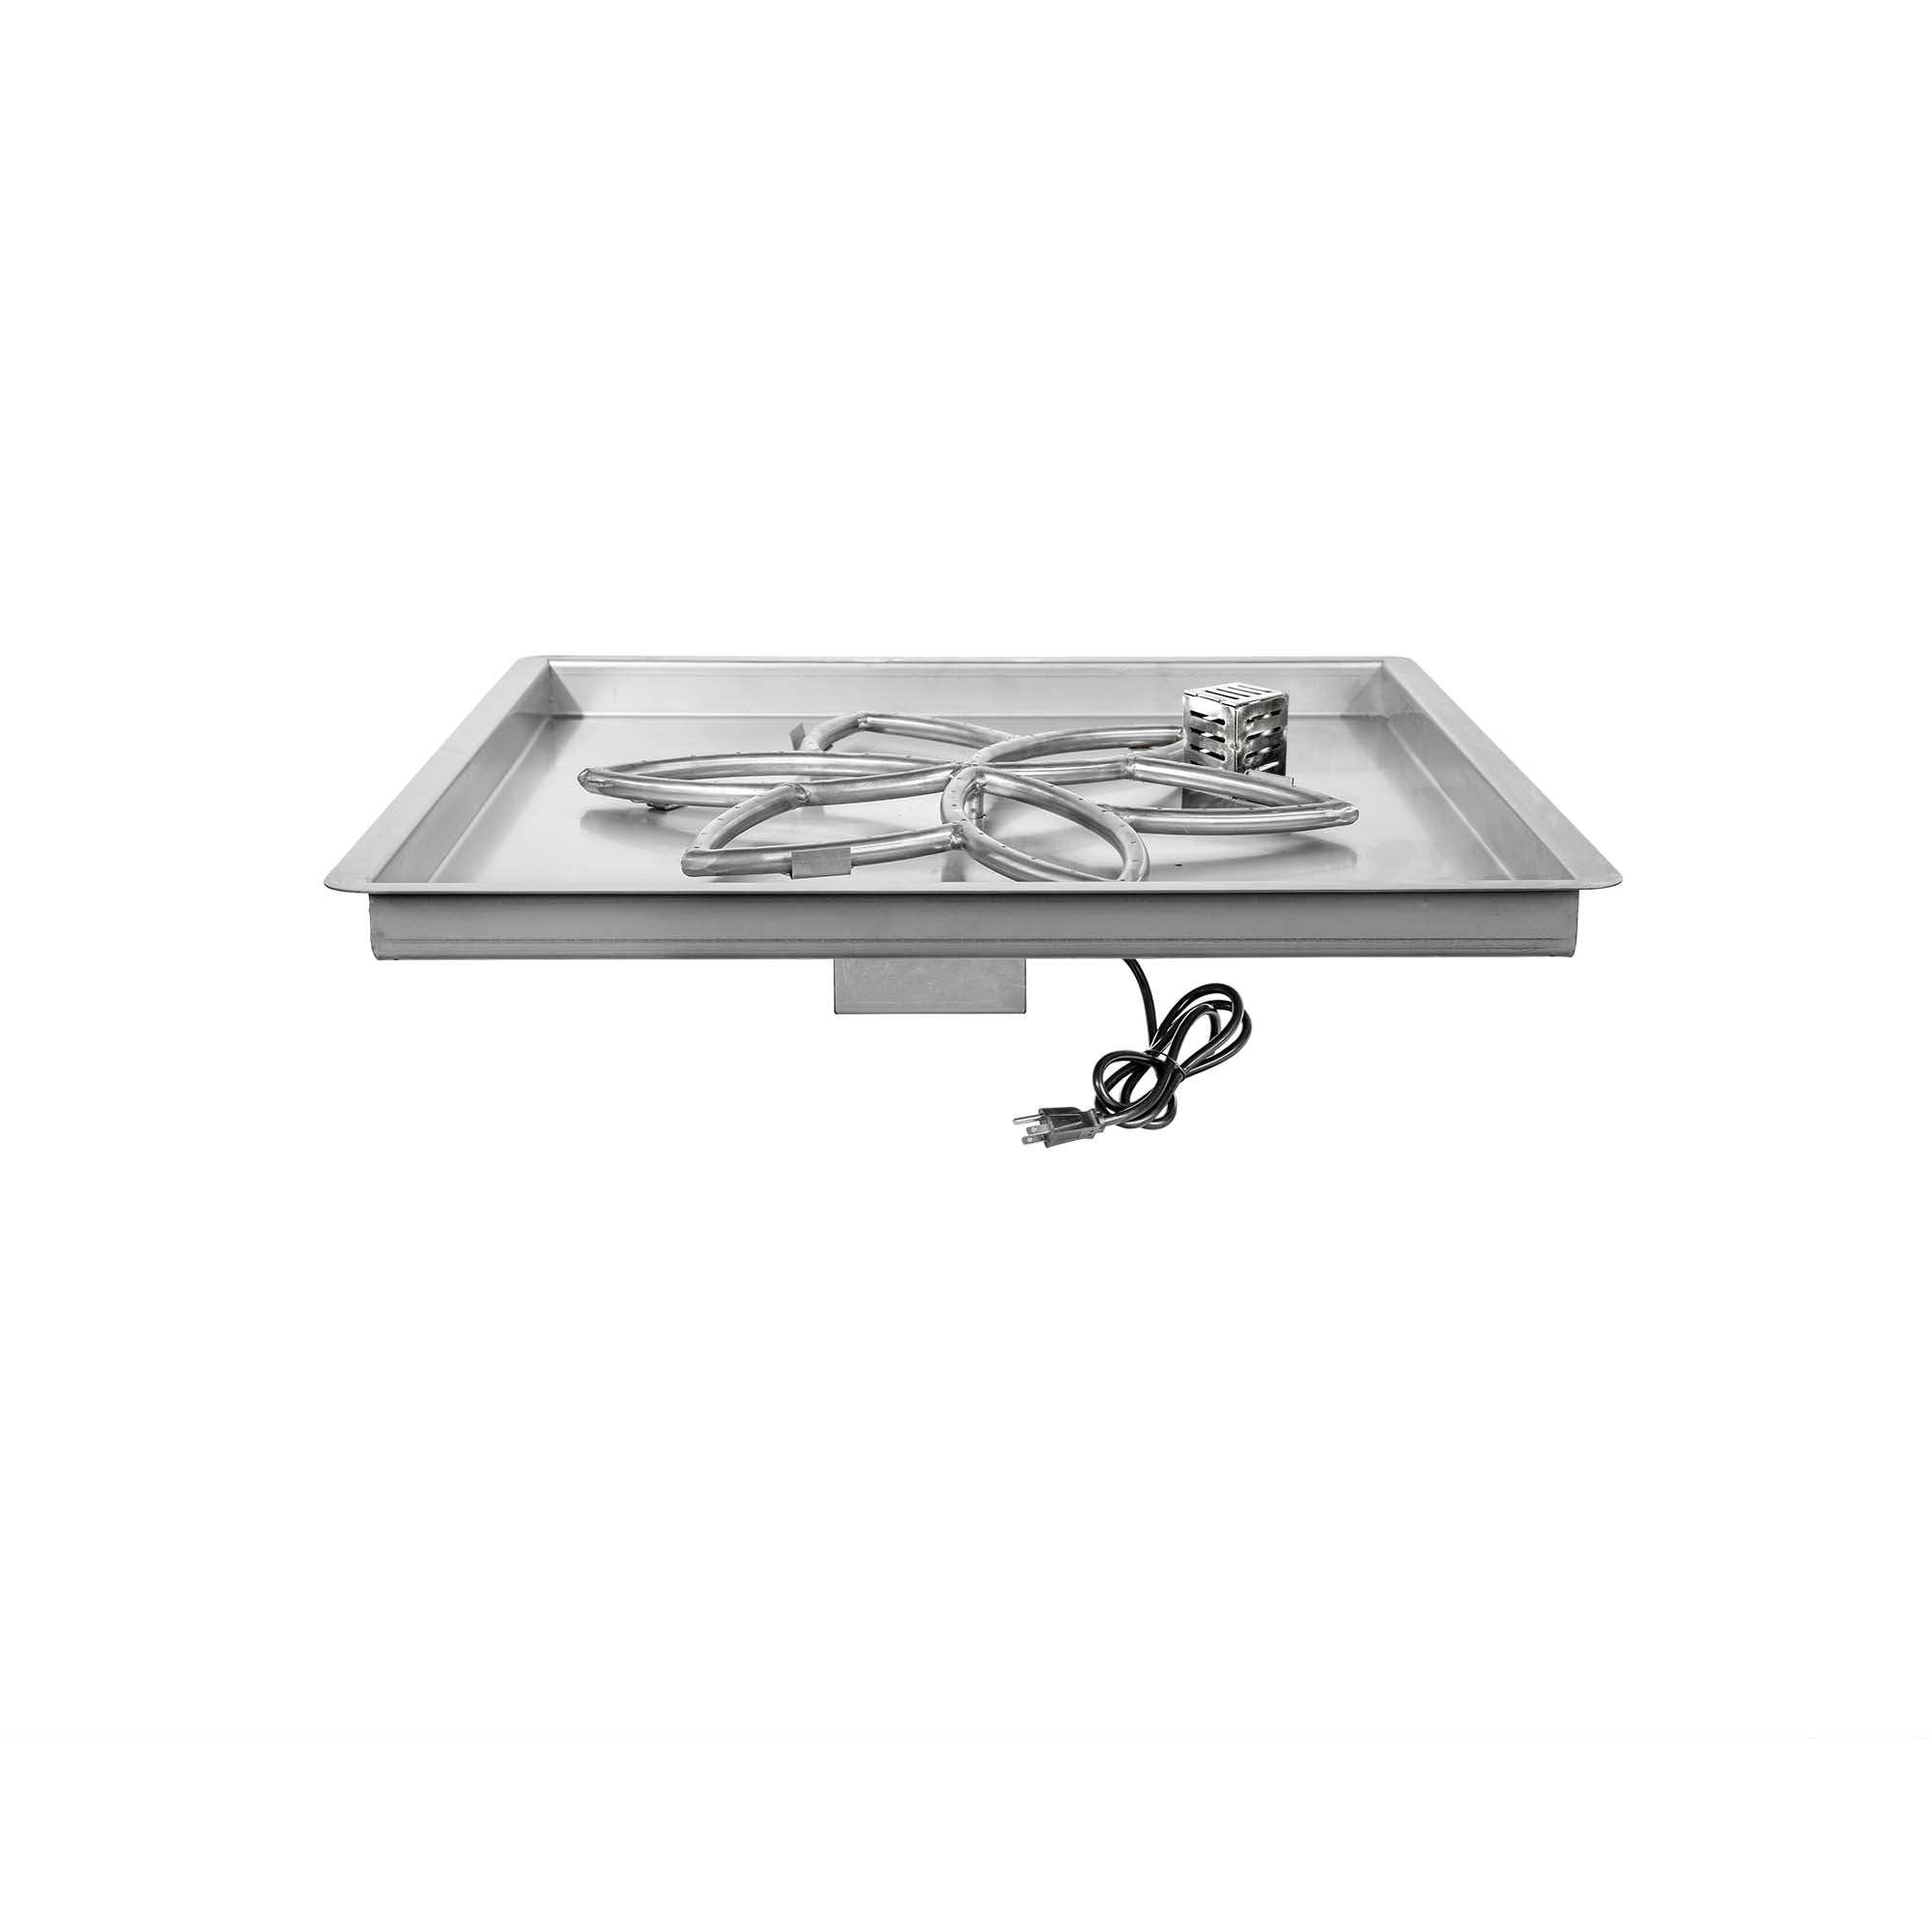 The Outdoor Plus Square Drop-in Pan with Stainless Steel Lotus Burner